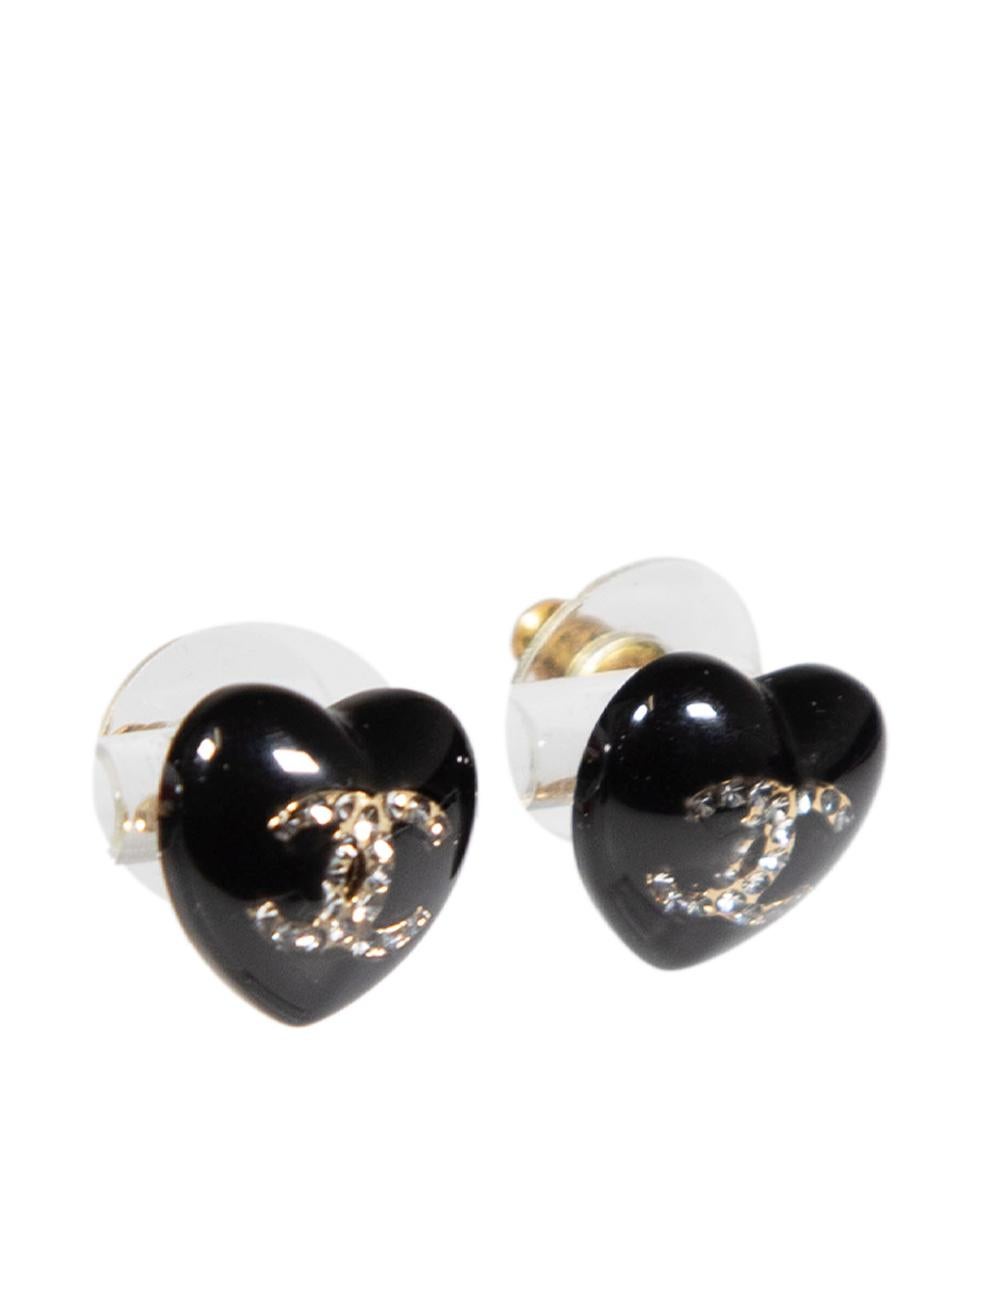 CONDITION is Very good. Hardly any visible wear to earrings is evident on this used Chanel designer resale item. These earrings come with original box and bag.
 
Details
2021
Black
Resin
Heart shaped earrings
CC strass logo
 
Made in France
